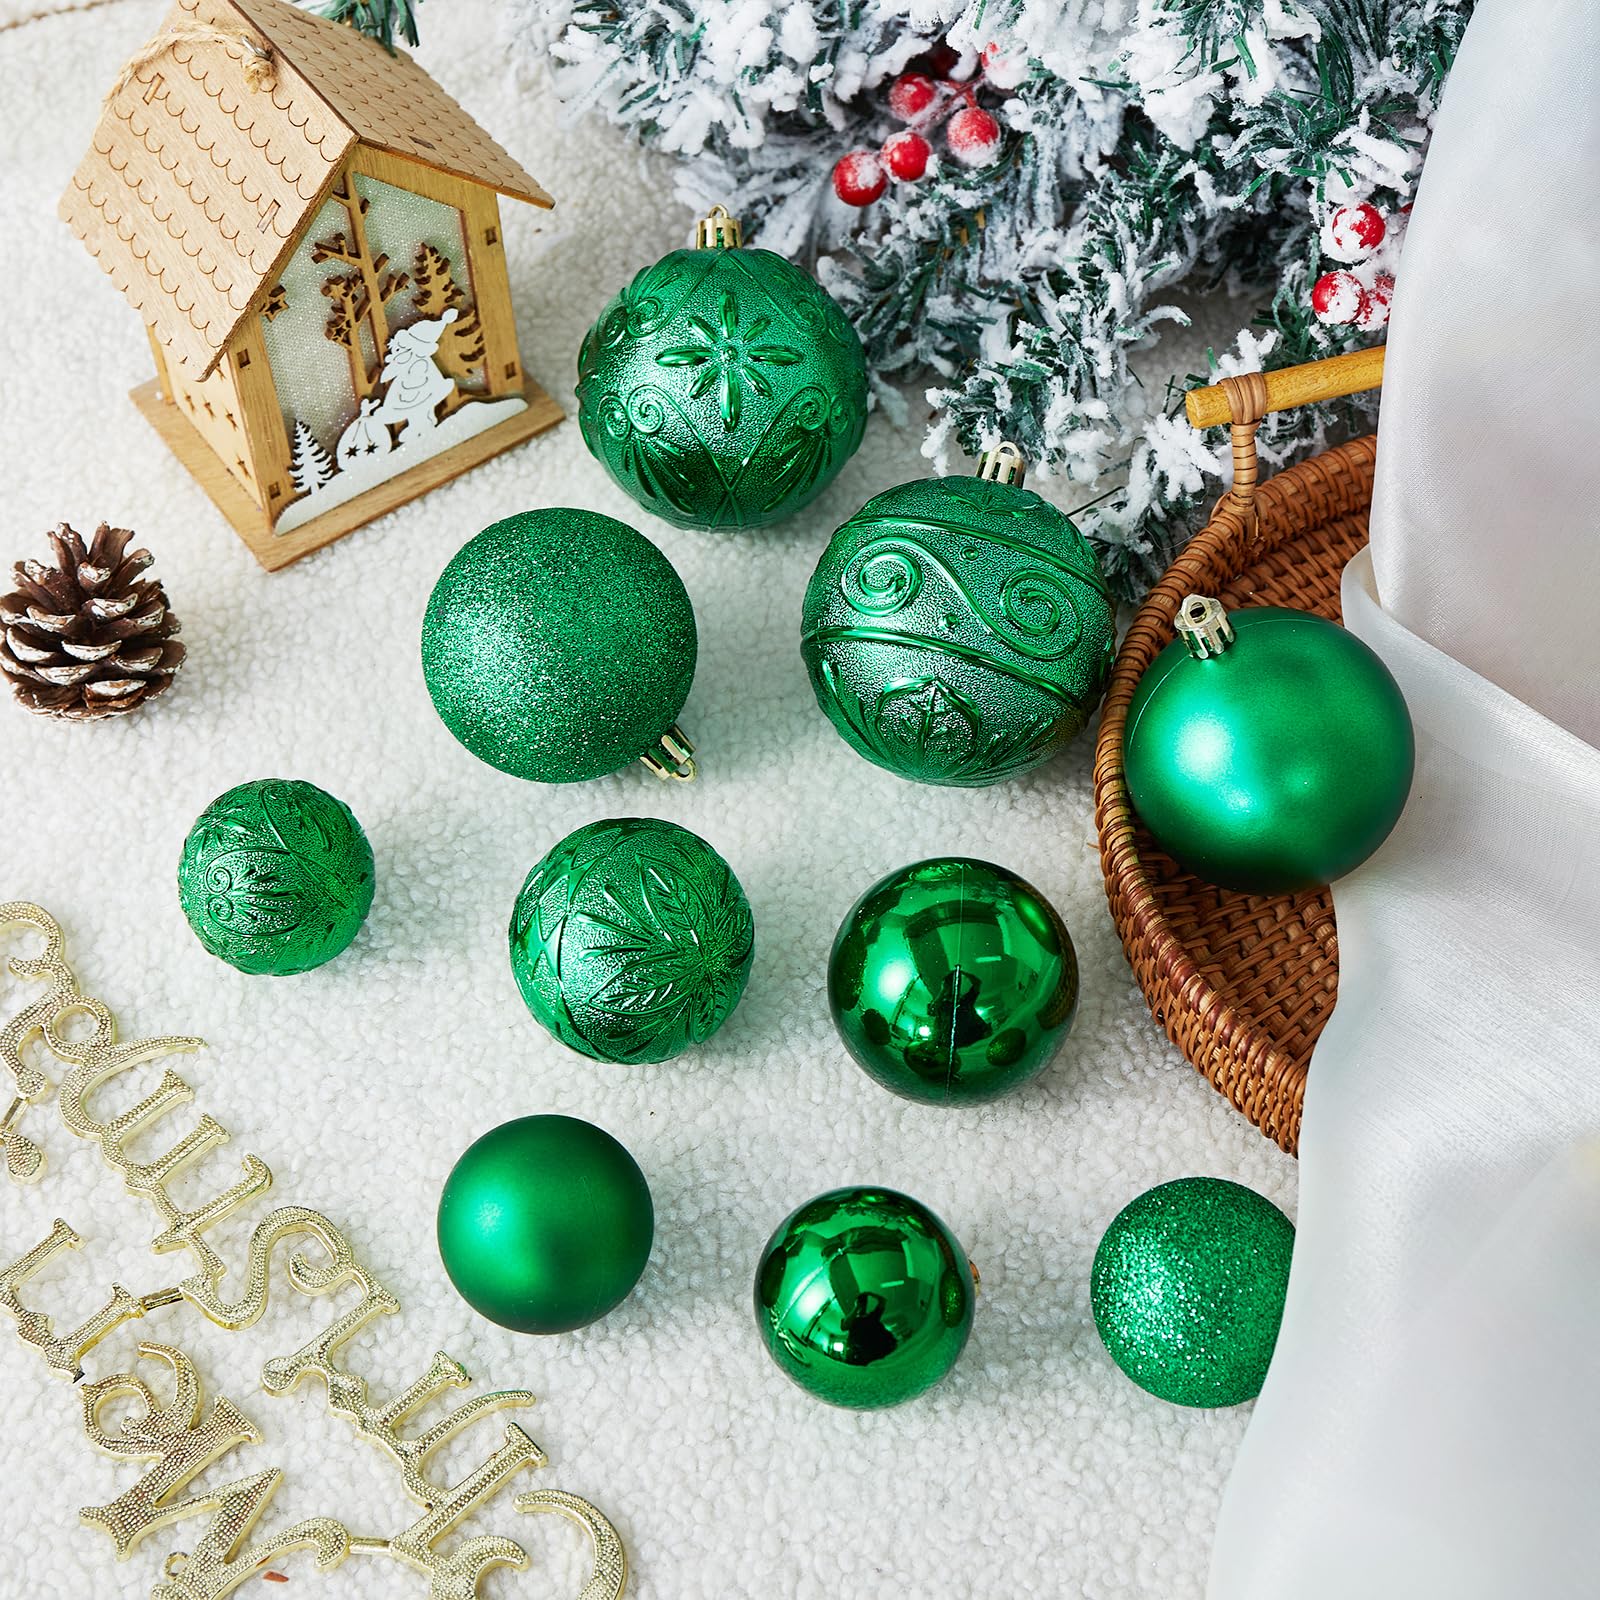 Wironlst Christmas Ball Ornaments - 30pcs Shatterproof Plastic Christmas Ornaments Hanging Ball Decorations for Xmas Tree, Holiday, Wedding, Party (Multi-Size, Green)